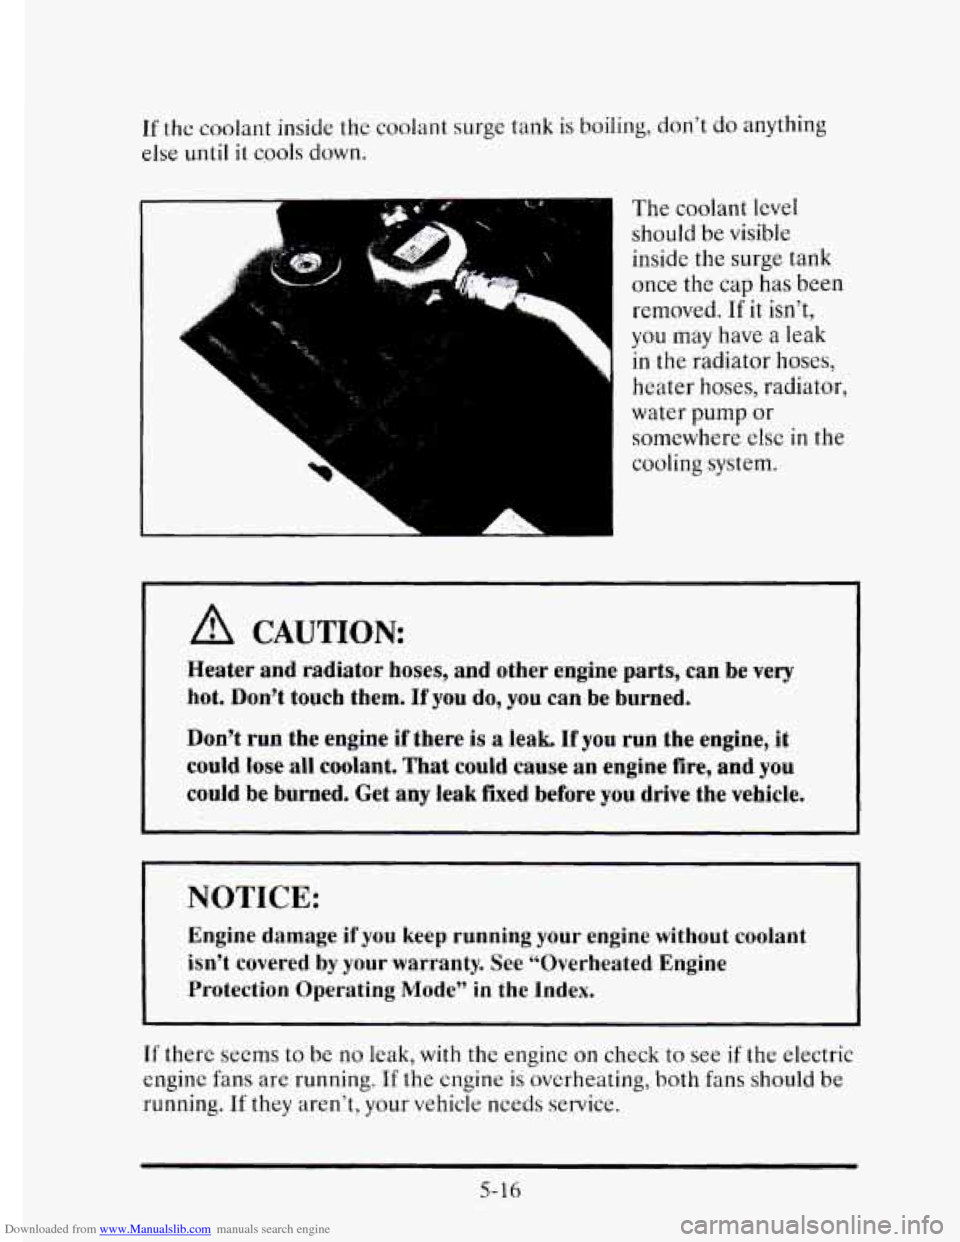 CADILLAC ELDORADO 1995 10.G User Guide Downloaded from www.Manualslib.com manuals search engine If the  coolant inside the coolant surge tank is boiling,  don’t do anything 
else  until 
it cools down. 
A CAUTION 
The  coolant level 
sho